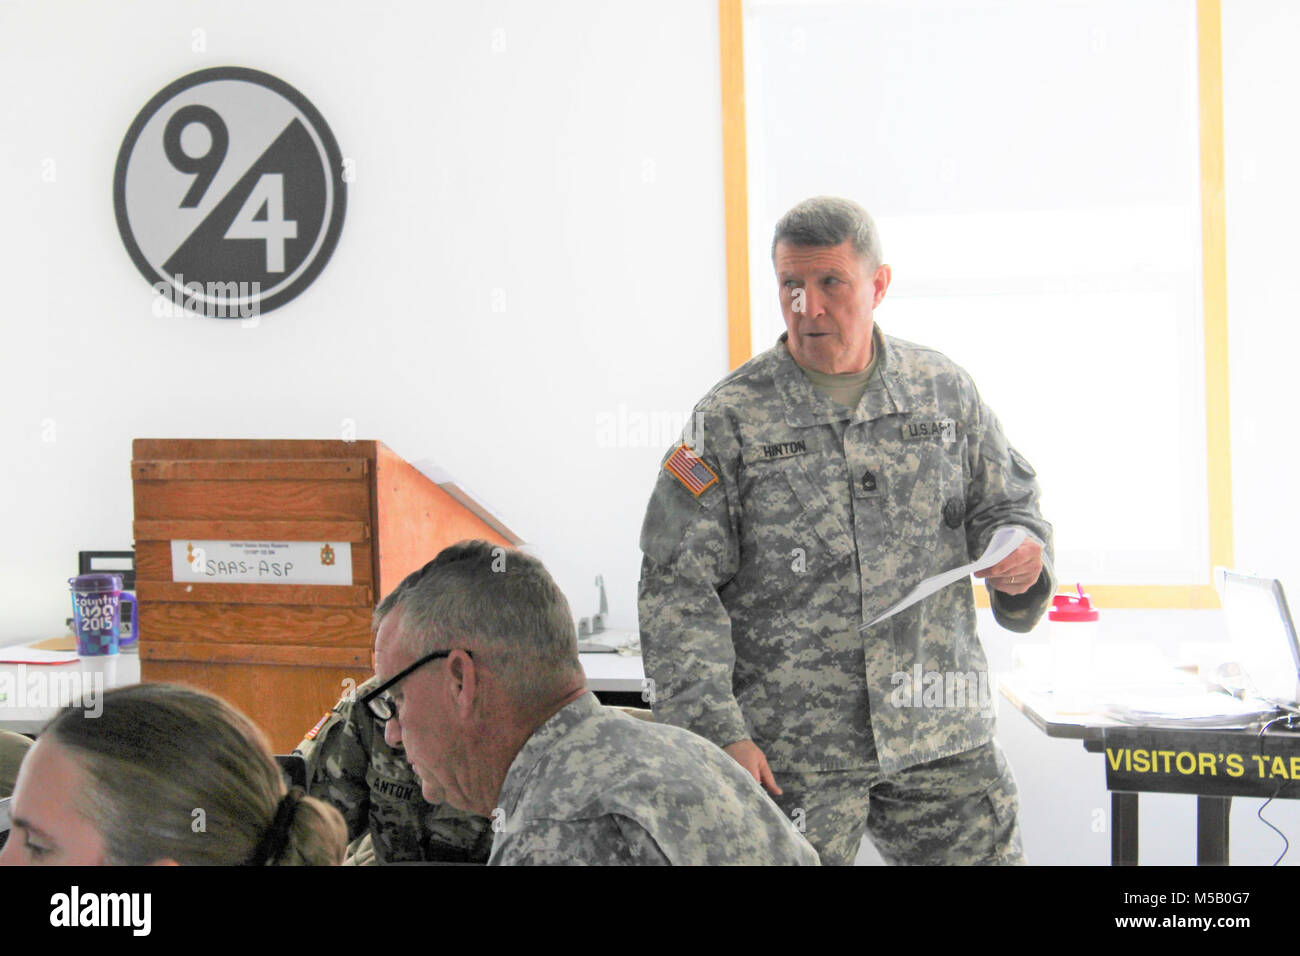 Instructor Sgt. 1st Class Lester Hinton with the 13th Battalion, 100th Regiment teaches students in the 89B Advanced Leader Course on Jan. 16, 2018, at Fort McCoy, Wis. The 13th, 100th is an ordnance battalion that provides training and training support to Soldiers in the ordnance maintenance military occupational specialty (MOS) series. The unit, aligned under the 3rd Brigade, 94th Division of the 80th Training Command, has been at Fort McCoy since about 1995. (U.S. Army Stock Photo